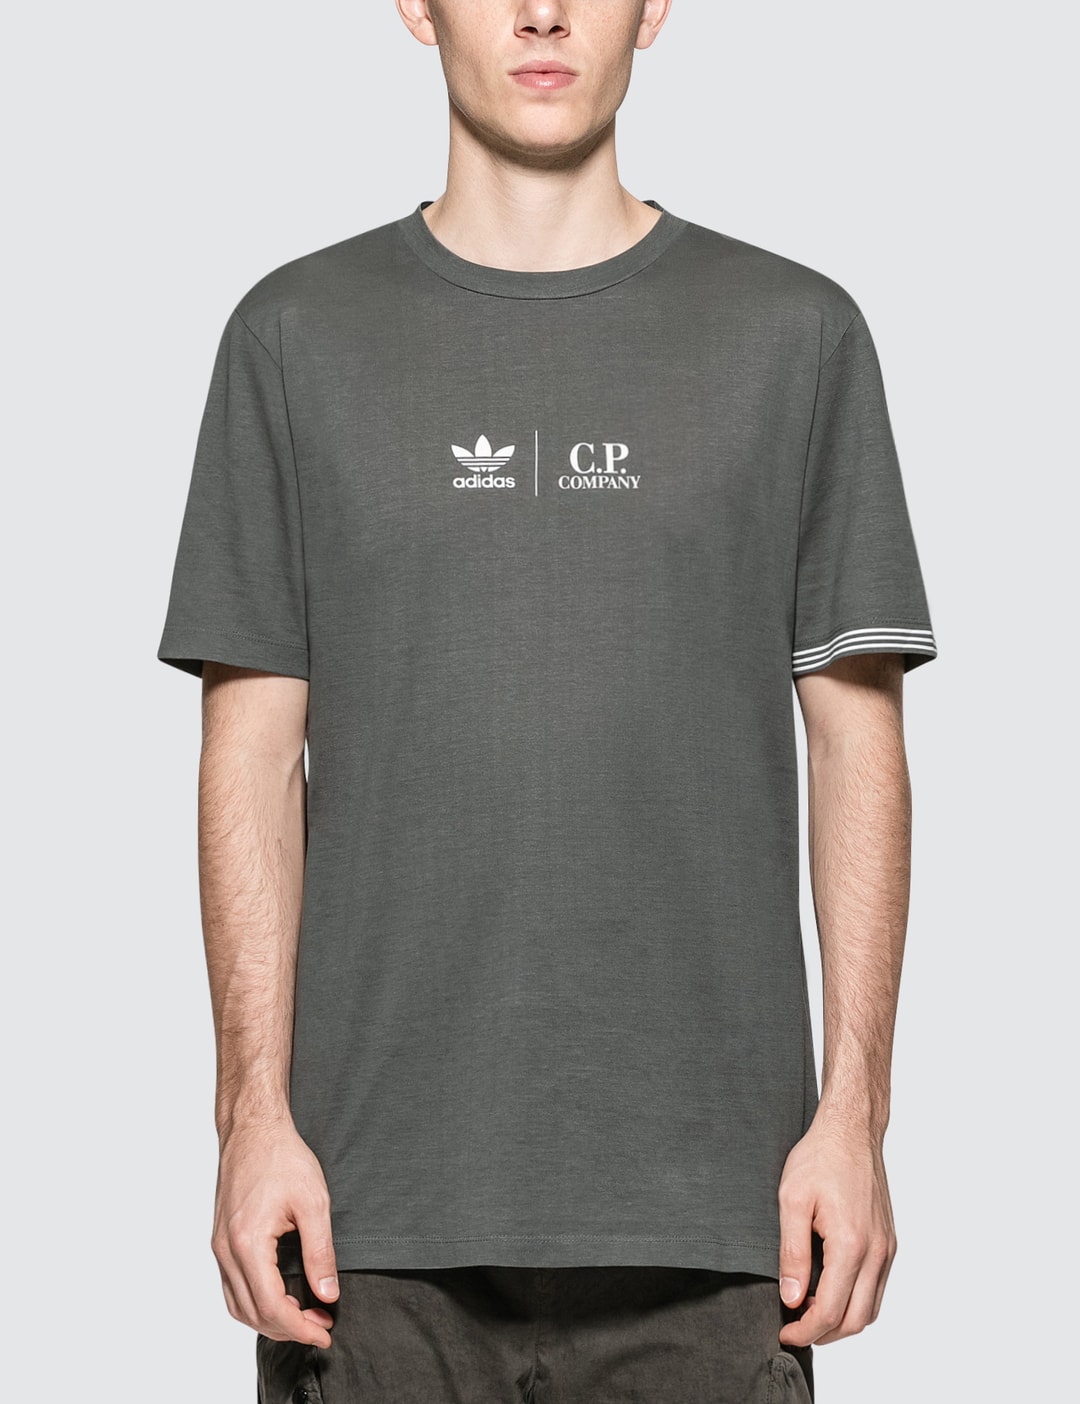 Regenboog Variant Beschaven Adidas Originals - CP Company x Adidas S/S T-Shirt | HBX - Globally Curated  Fashion and Lifestyle by Hypebeast